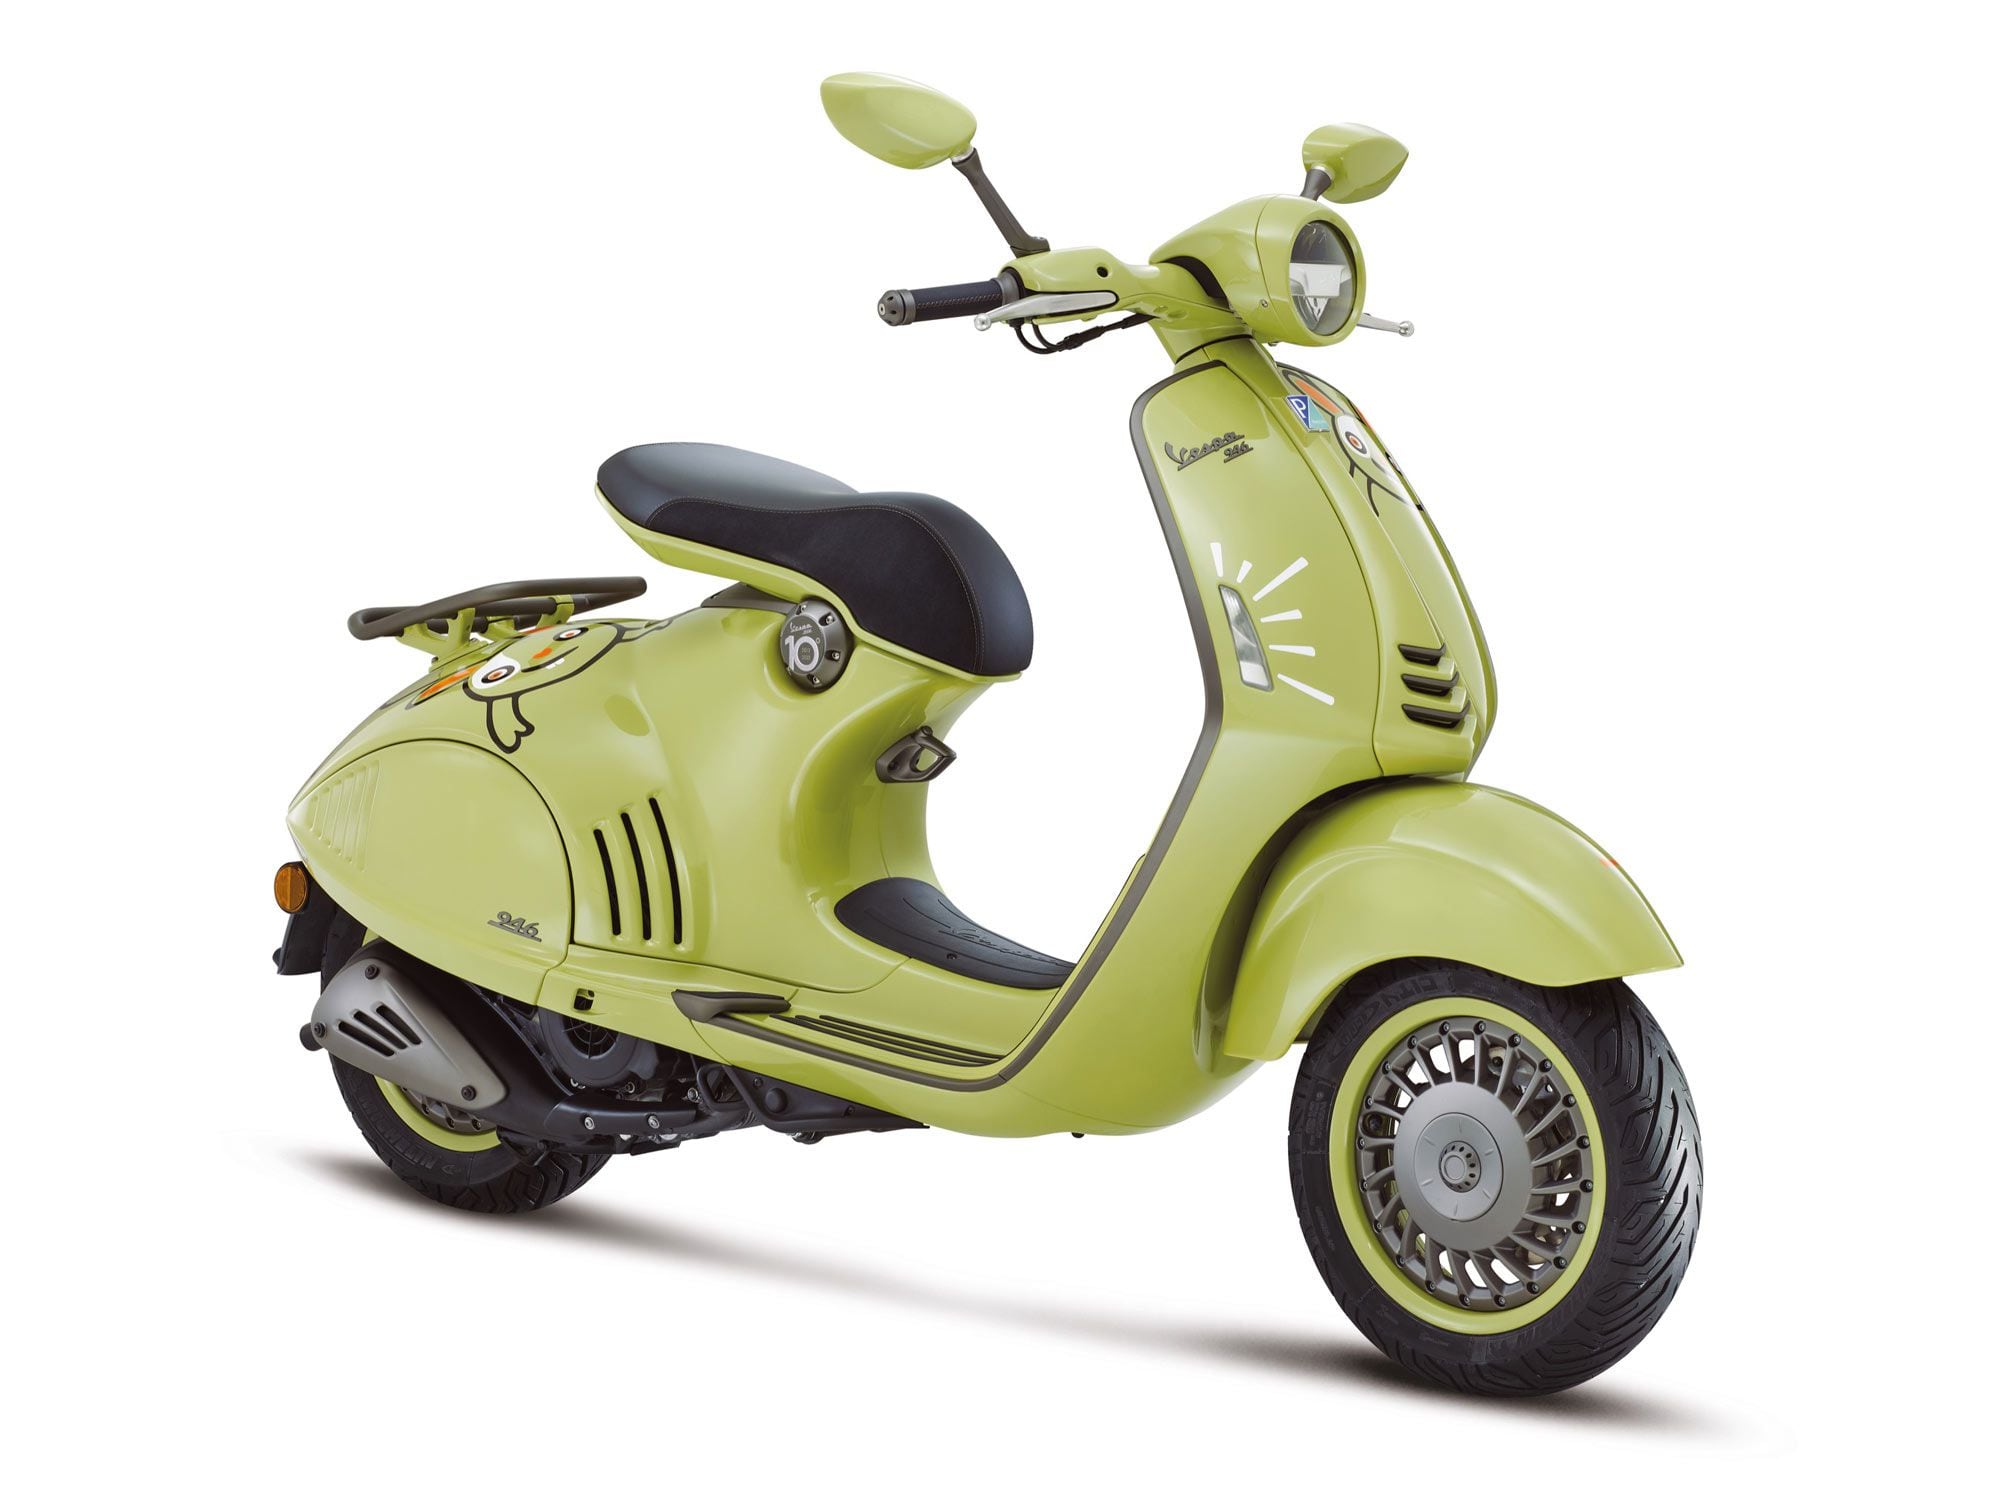 No price information yet for the 2023 Vespa 946 Bunny Edition.